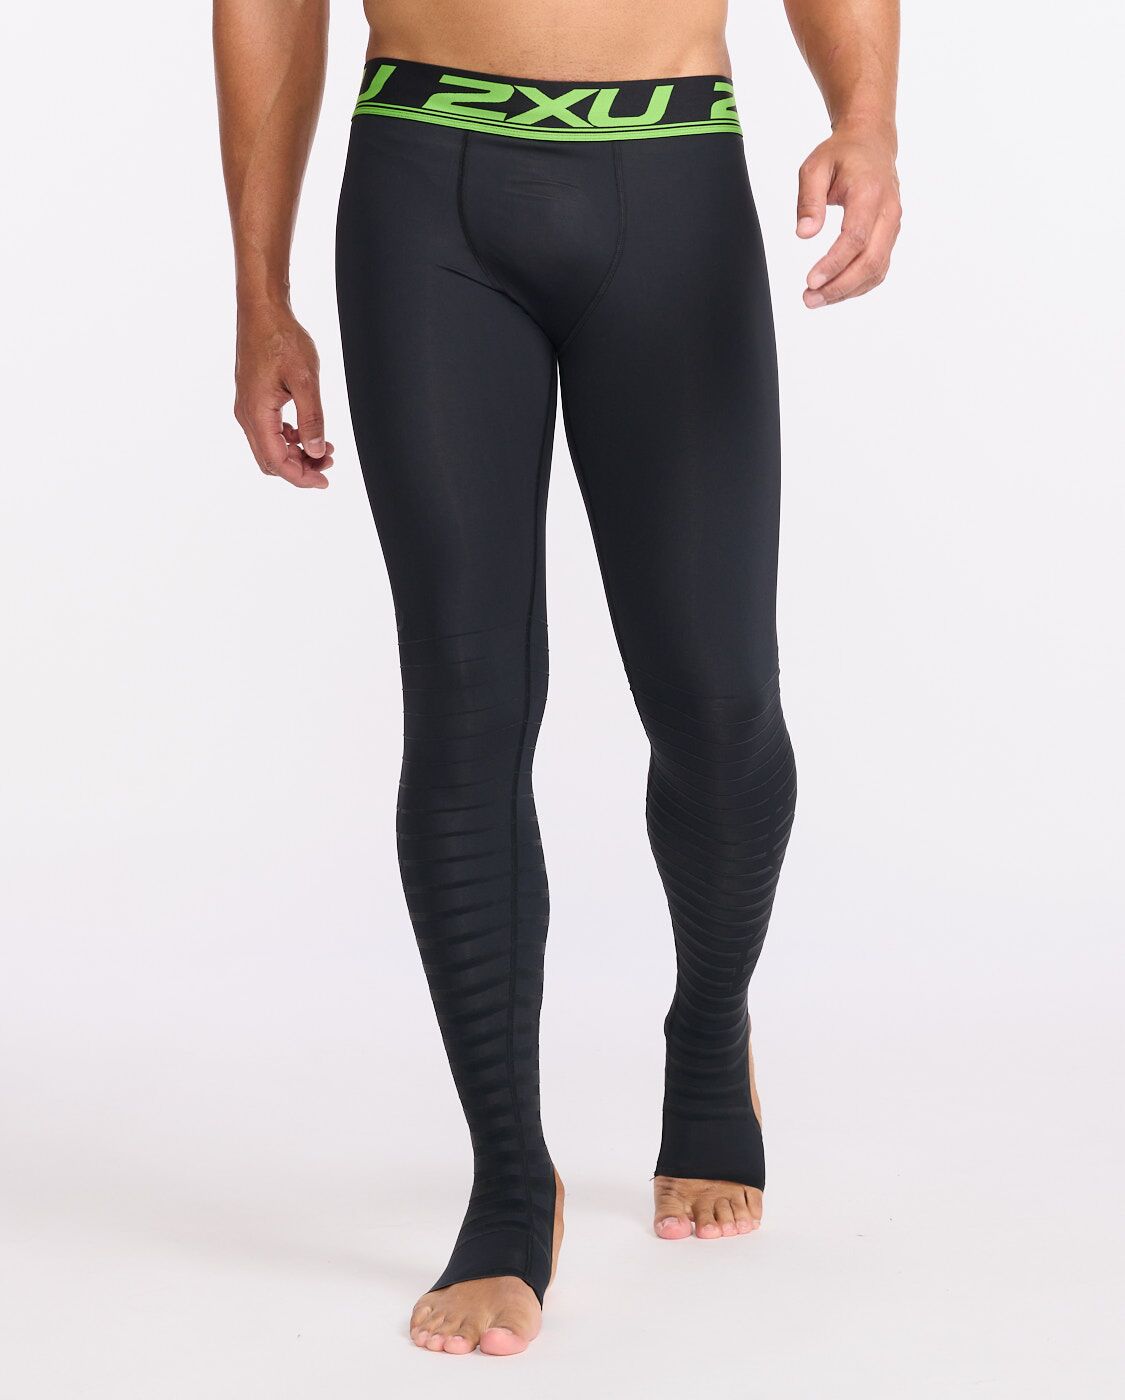 Power Recovery compression Tights – 2XU US